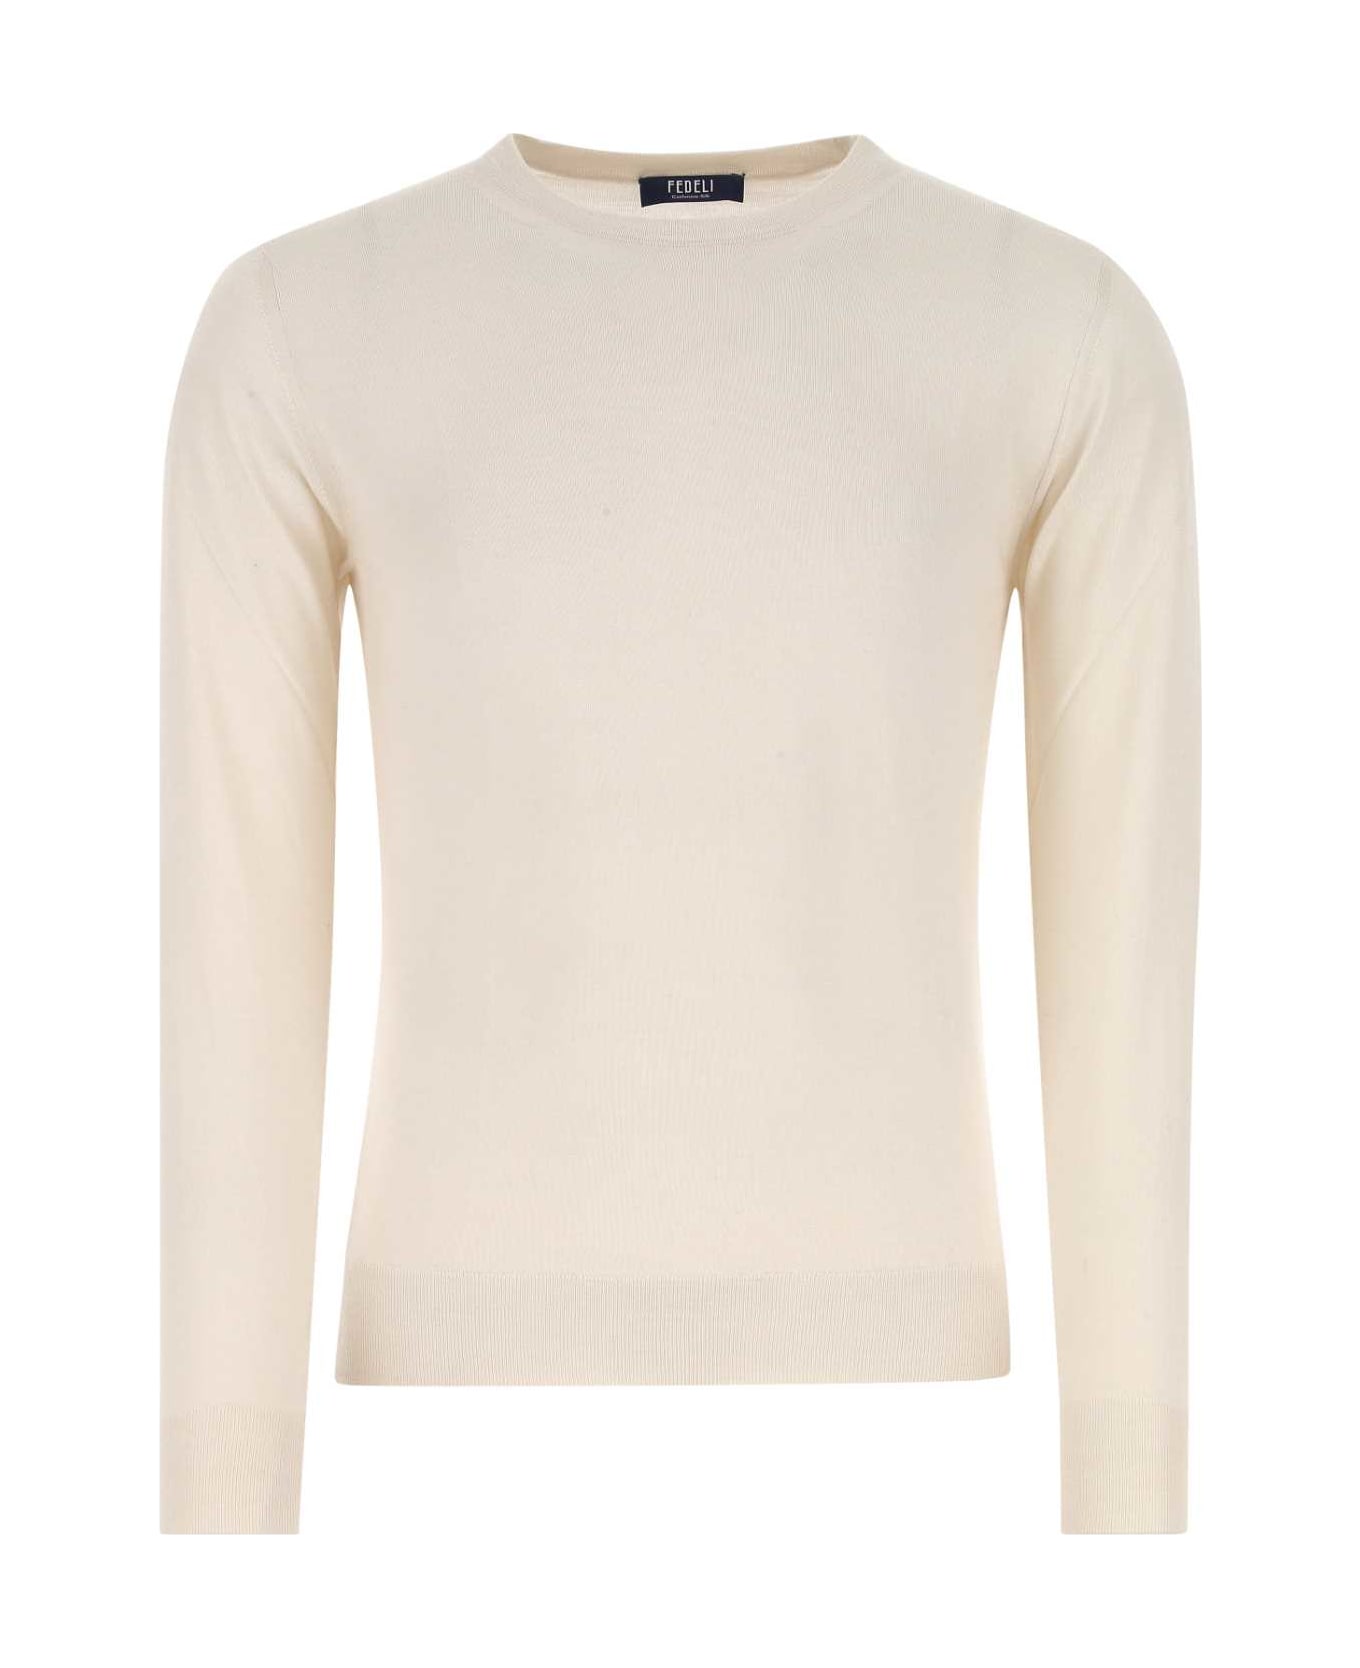 Fedeli Ivory Cashmere Blend Sweater - 40